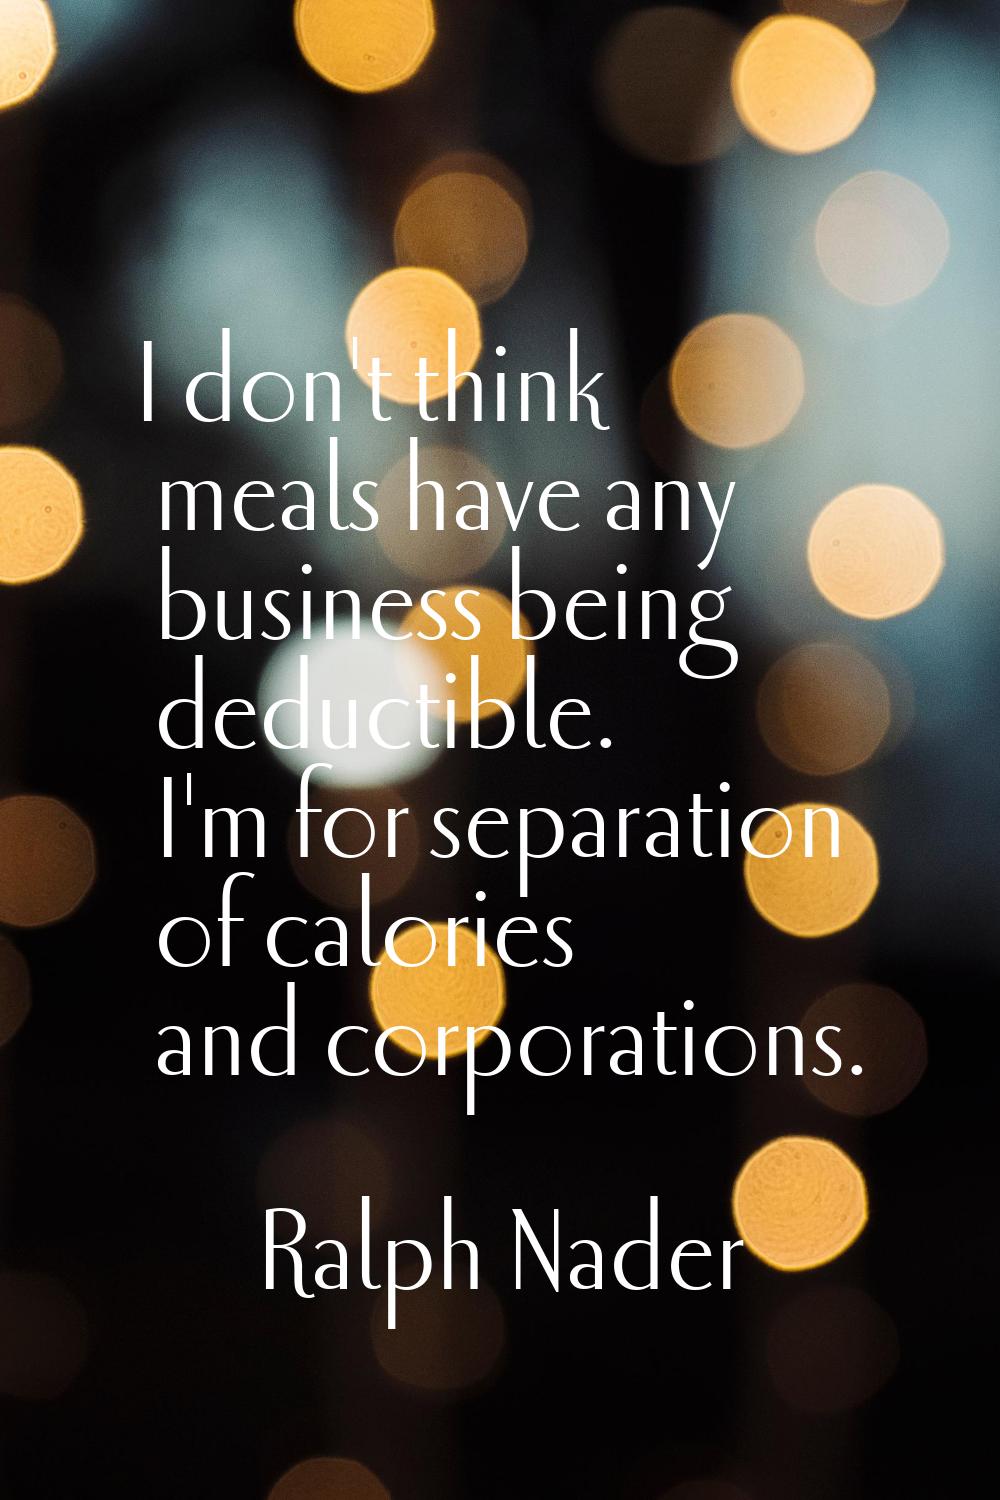 I don't think meals have any business being deductible. I'm for separation of calories and corporat